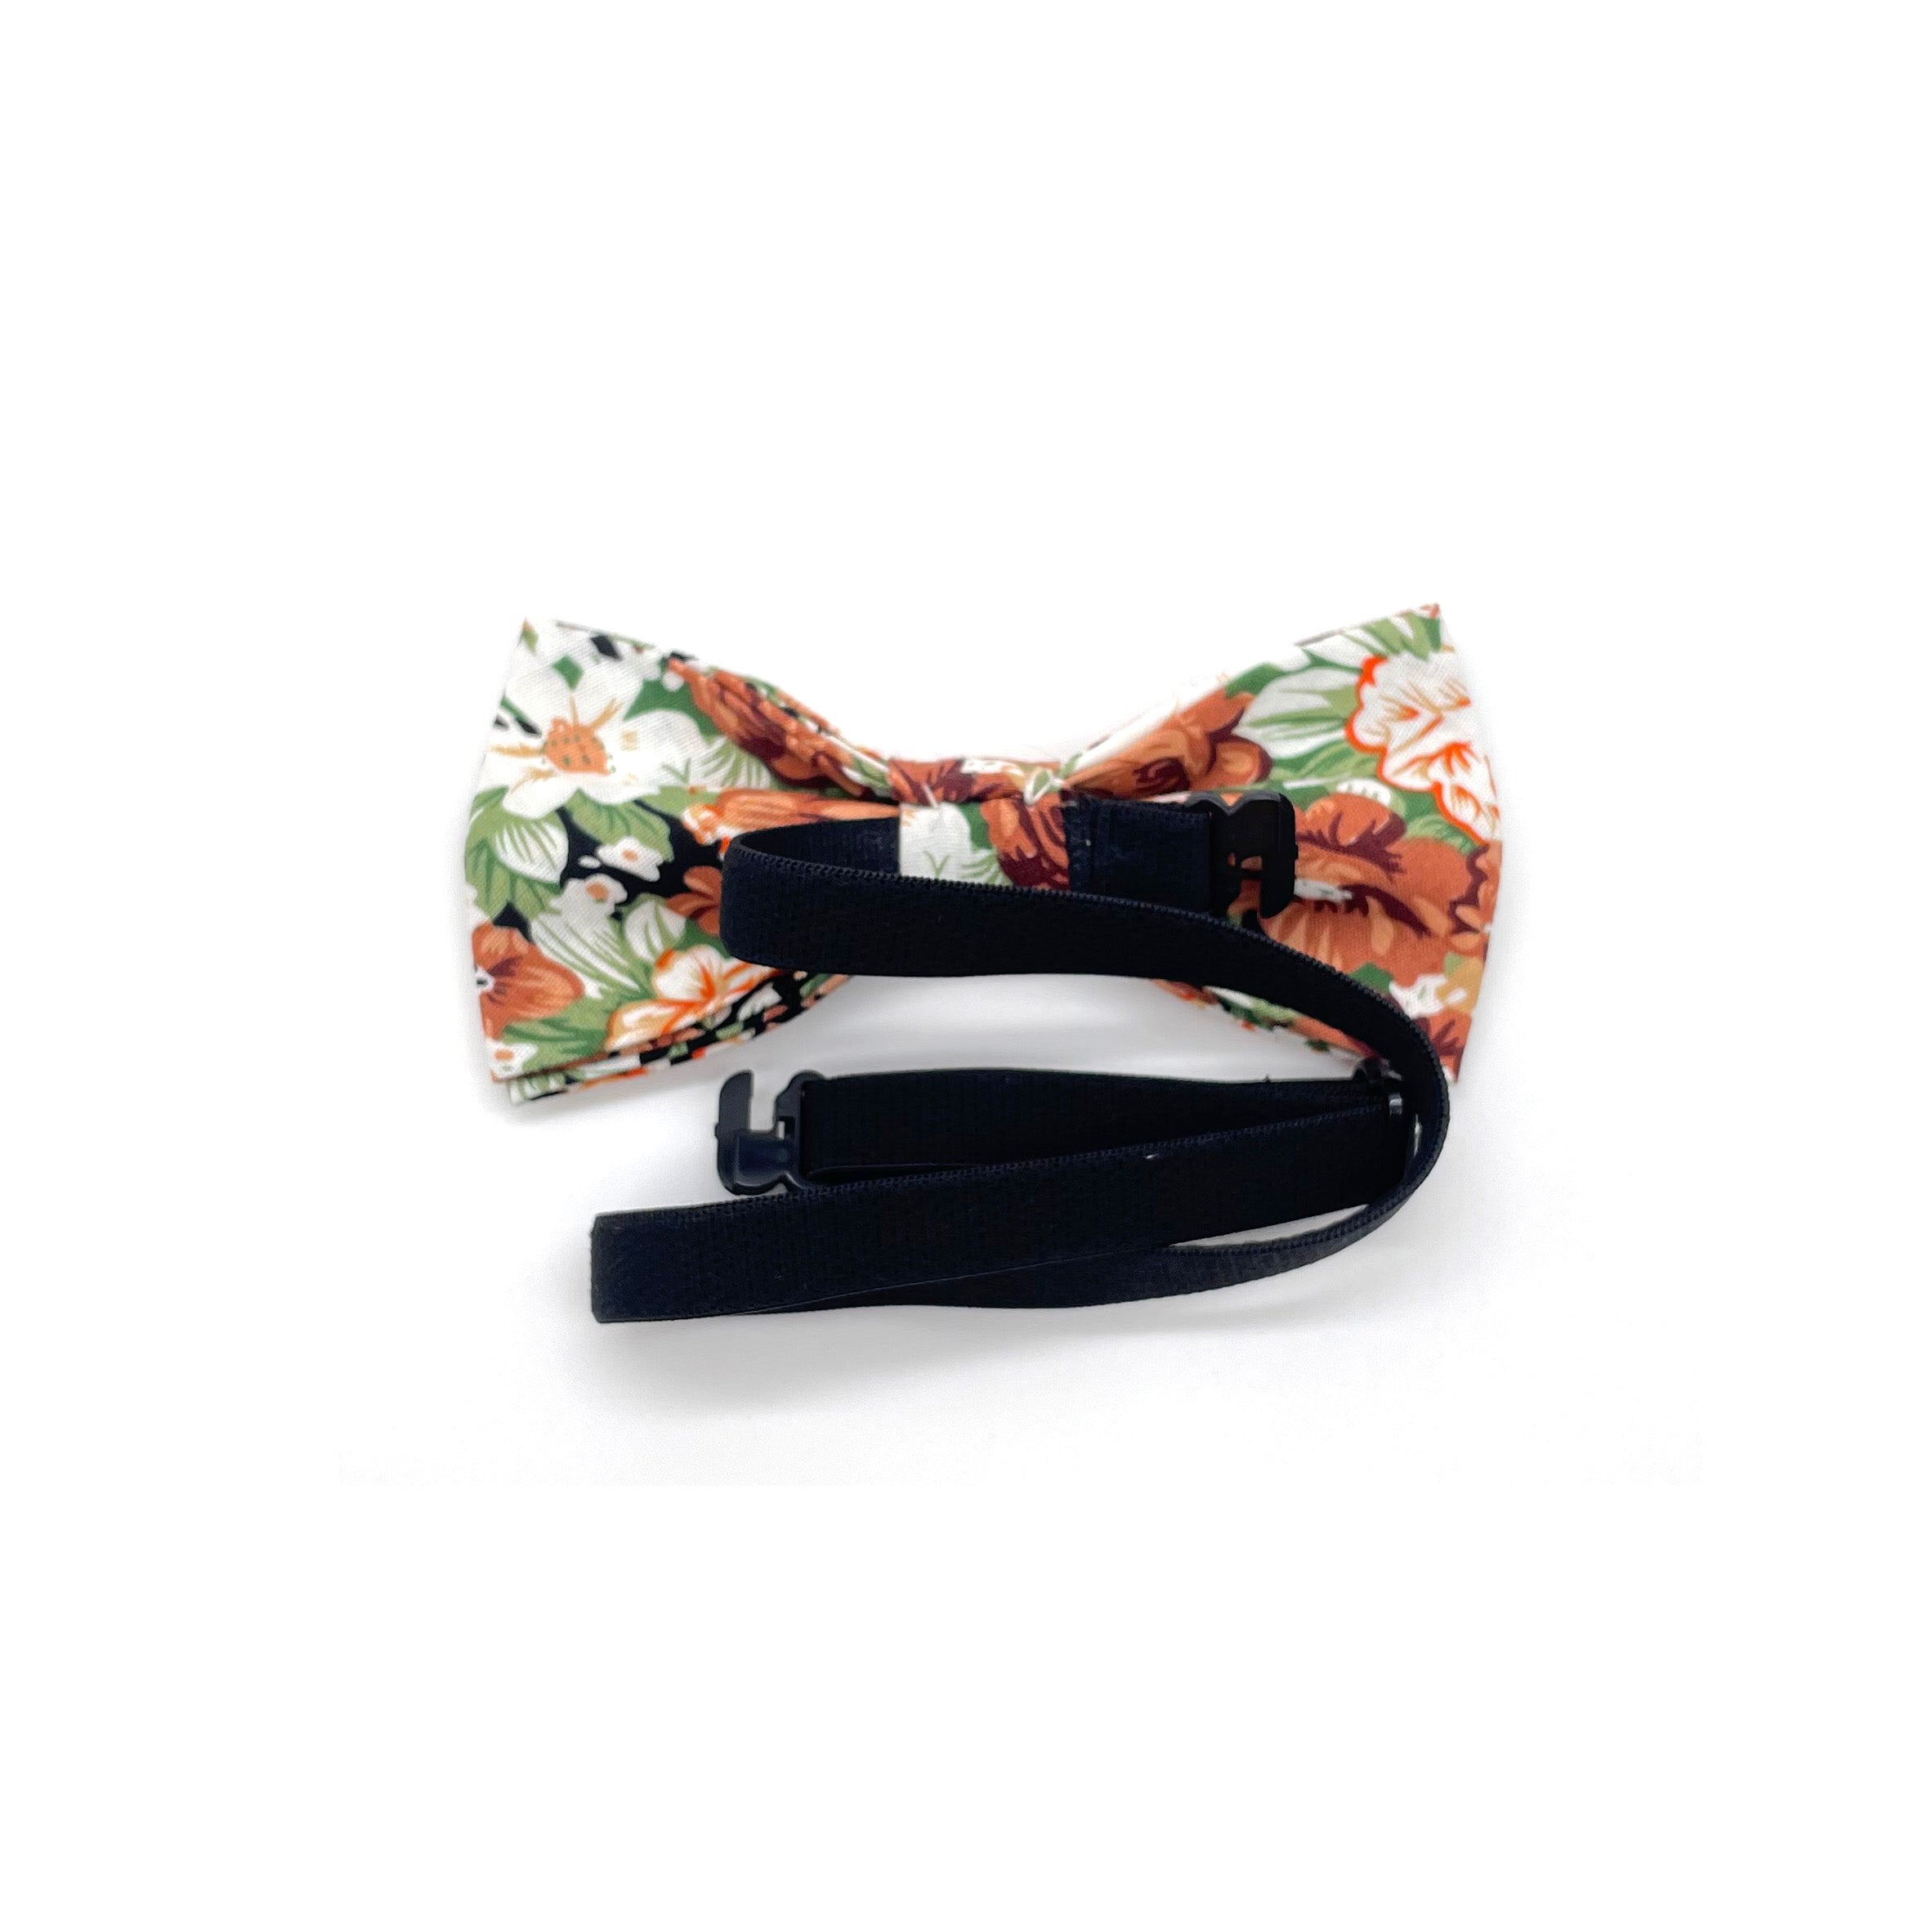 Orange Kids Floral Pre-Tied Bow Tie PEACH MYTIESHOP-Kids Floral Baby Bow tie PEACH Color: Orange and Black Strap is adjustablePre-Tied bowtieBow Tie 10.5 * 6CM Great for Prom Dinners Interviews Photo shoots Photo sessions Dates Wedding Attendant Ring Bearers Fits toddlers and babies. Evabder baby ow tie toddler bow tie floral for wedding and events groom groomsmen flower bow tie mytieshop ring bearer page boy bow tie white bow tie white and blue tie kids bowtie floral Adjustable wedding attire f